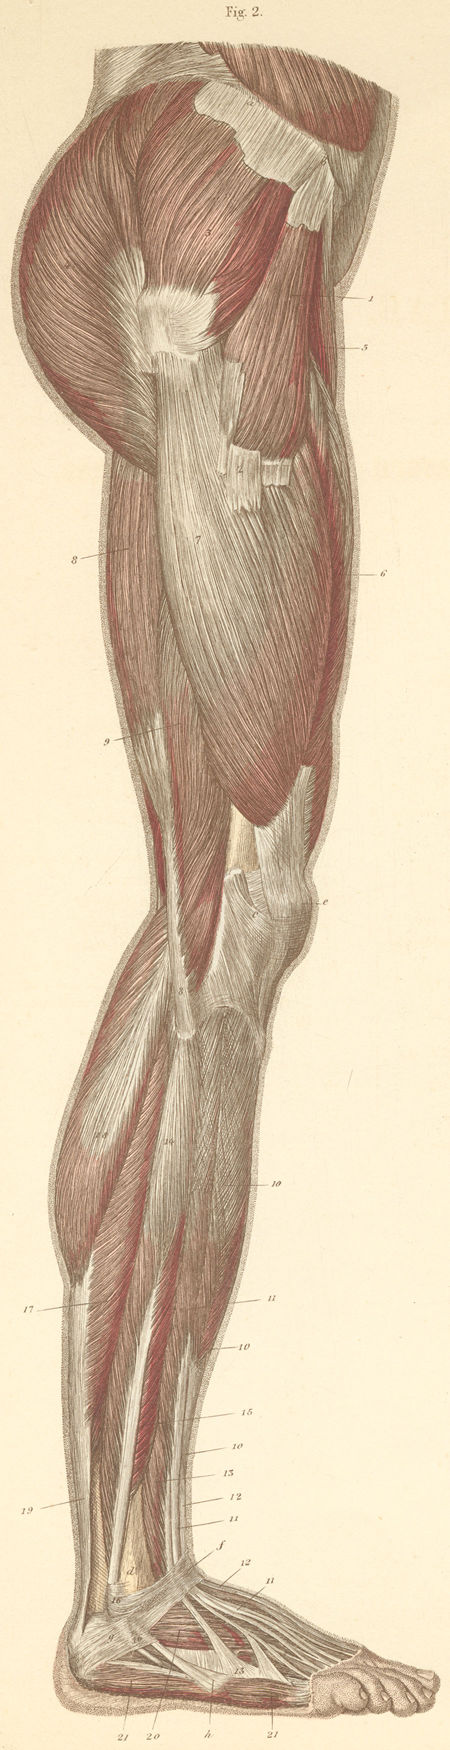 Muscles of the medial side of the lower limb